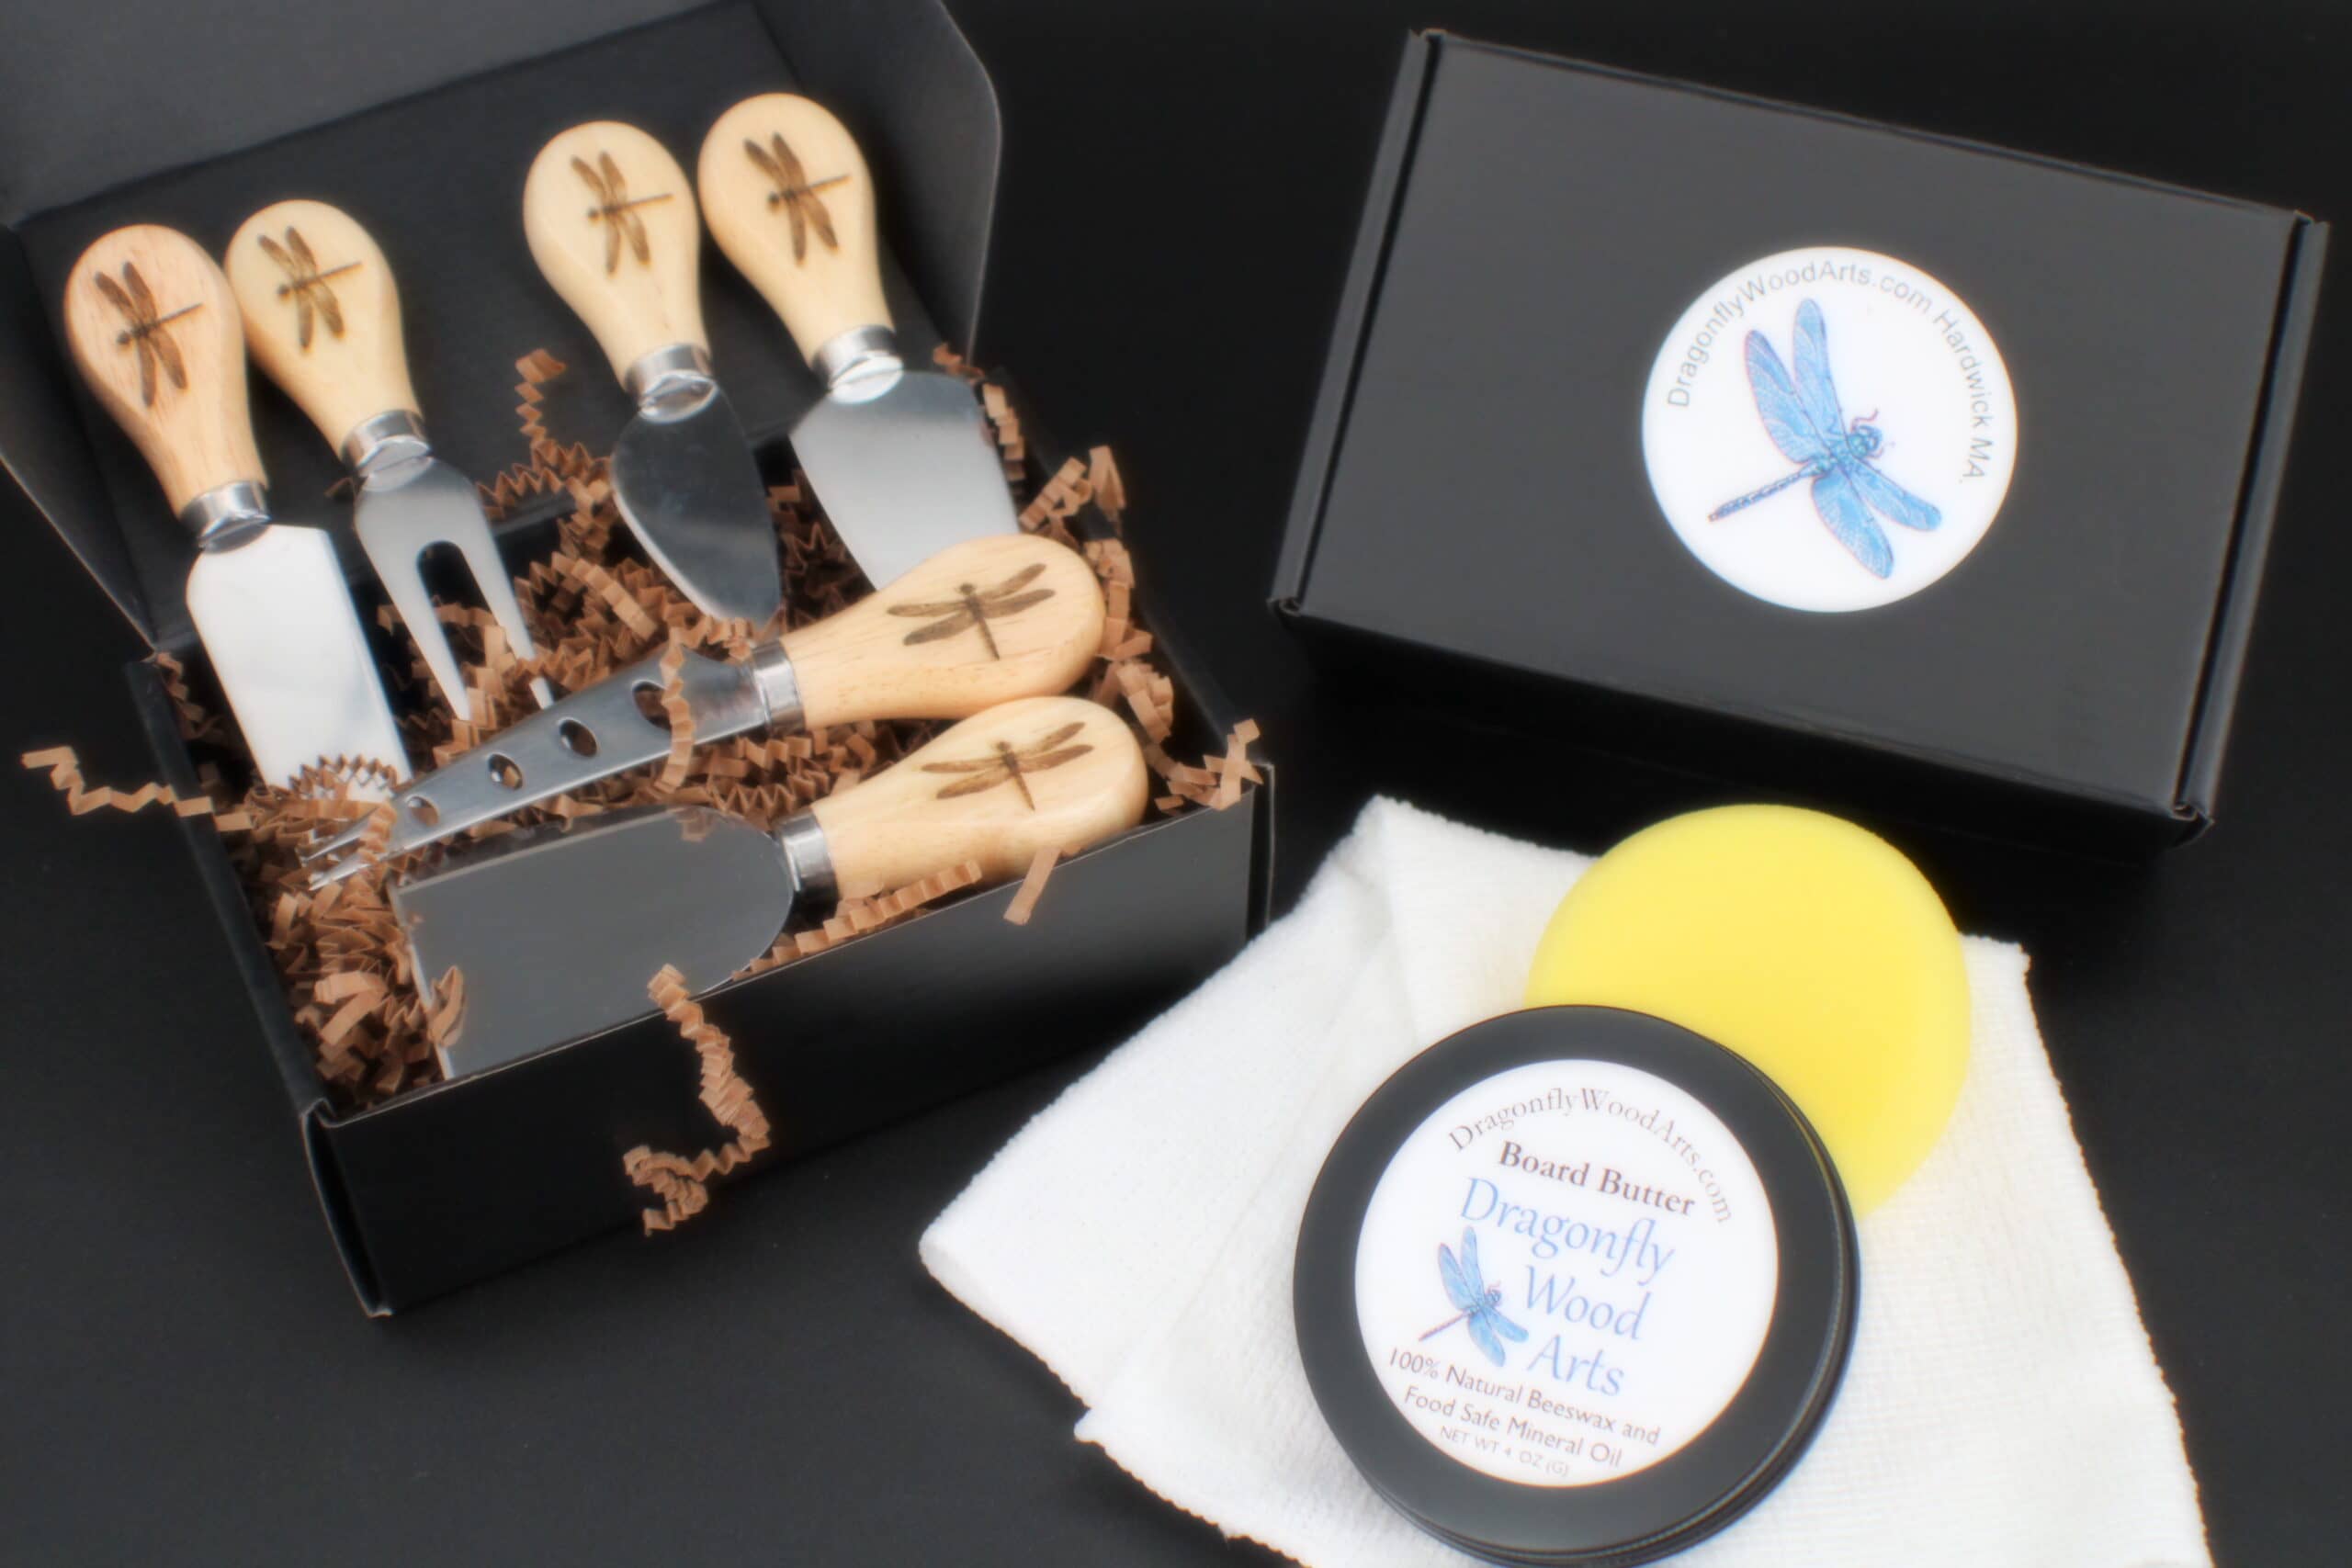 6-piece dragonfly engraved charcuterie set with board butter care kit